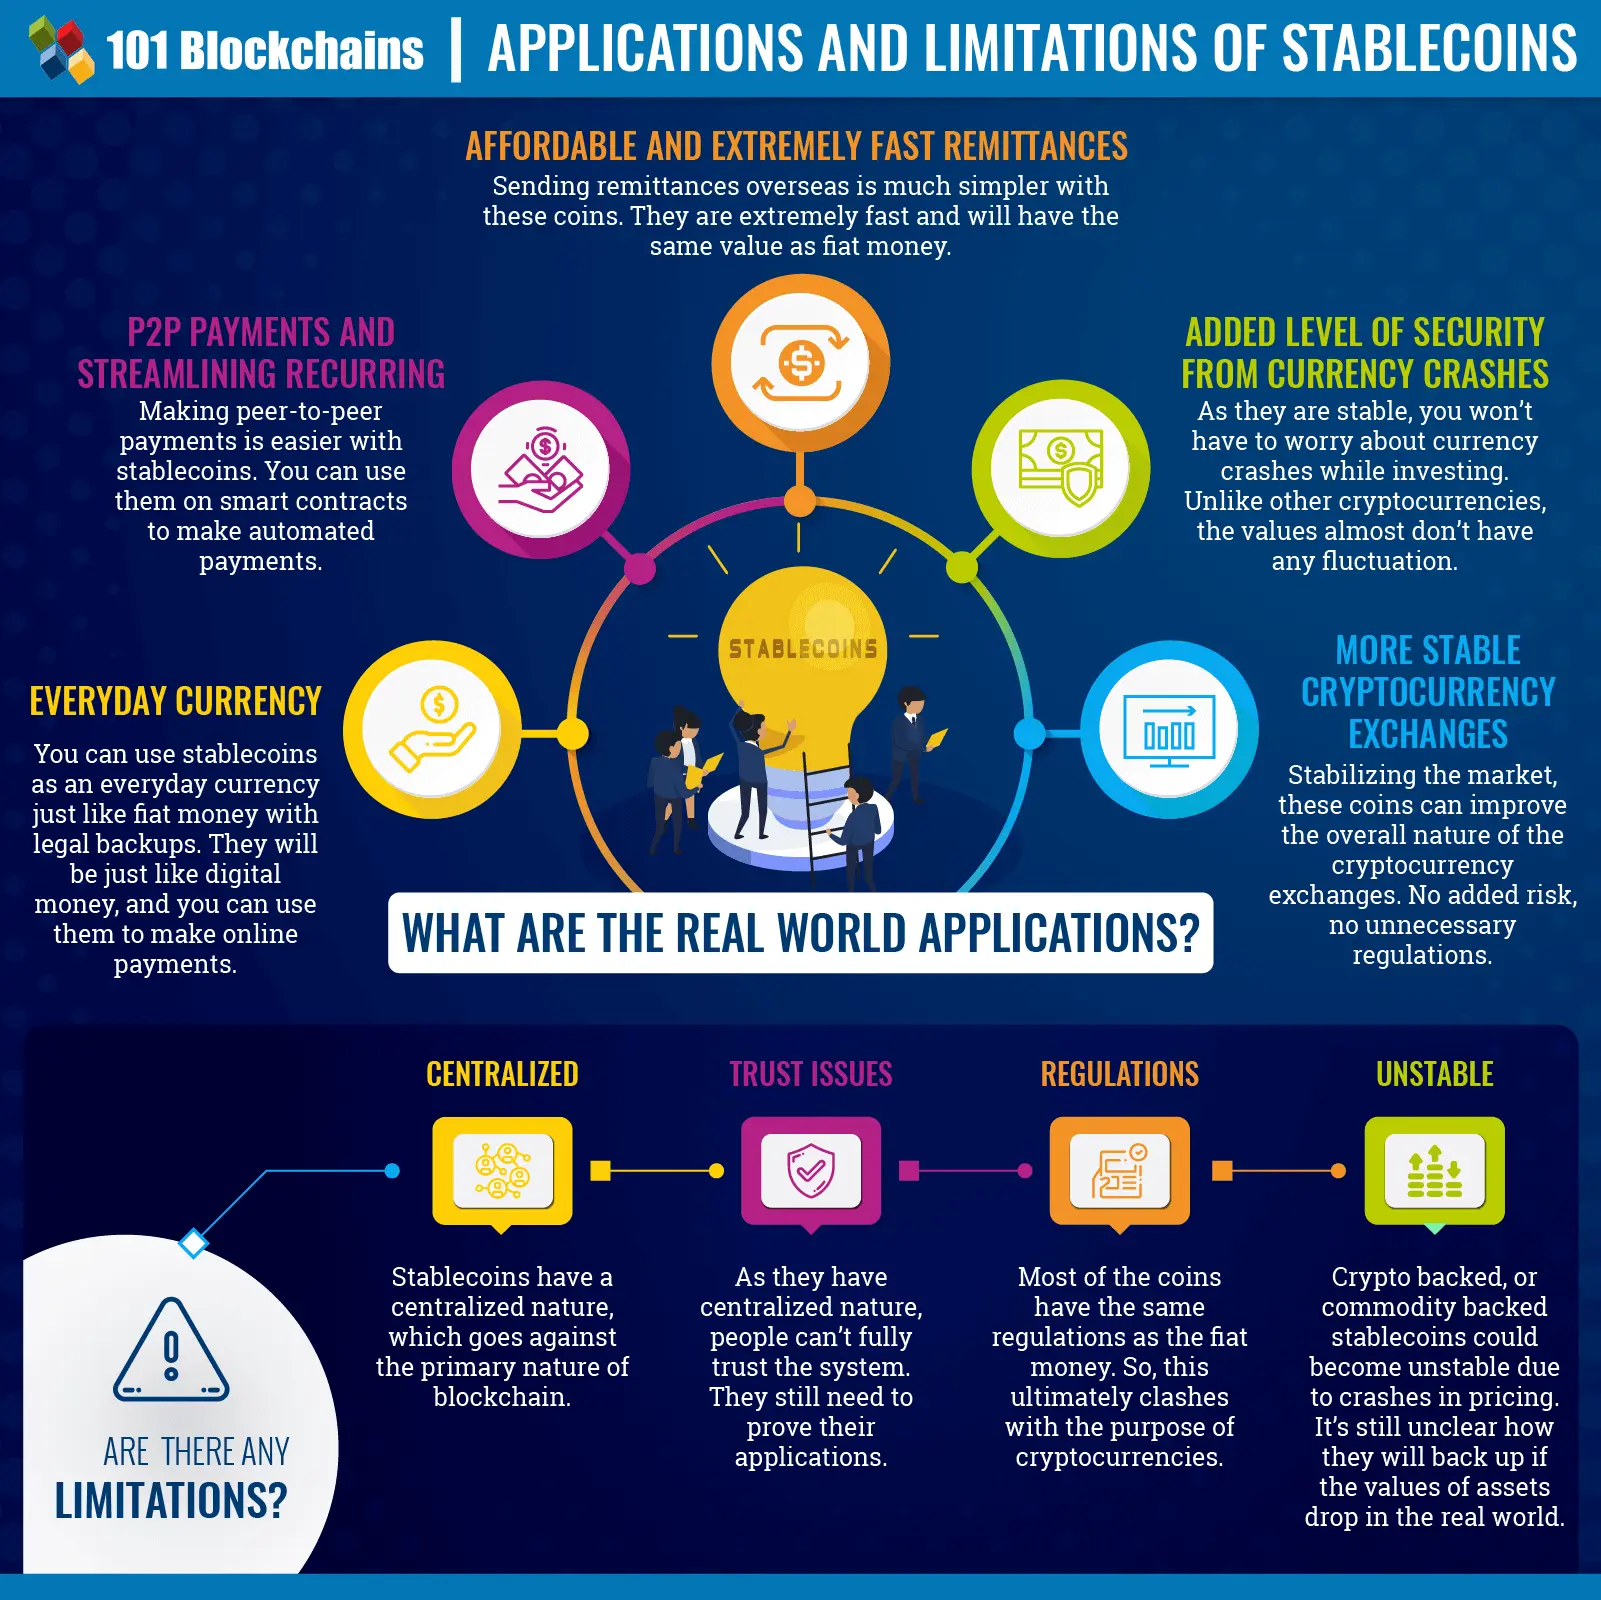 Application and Limitations of Stablecoin